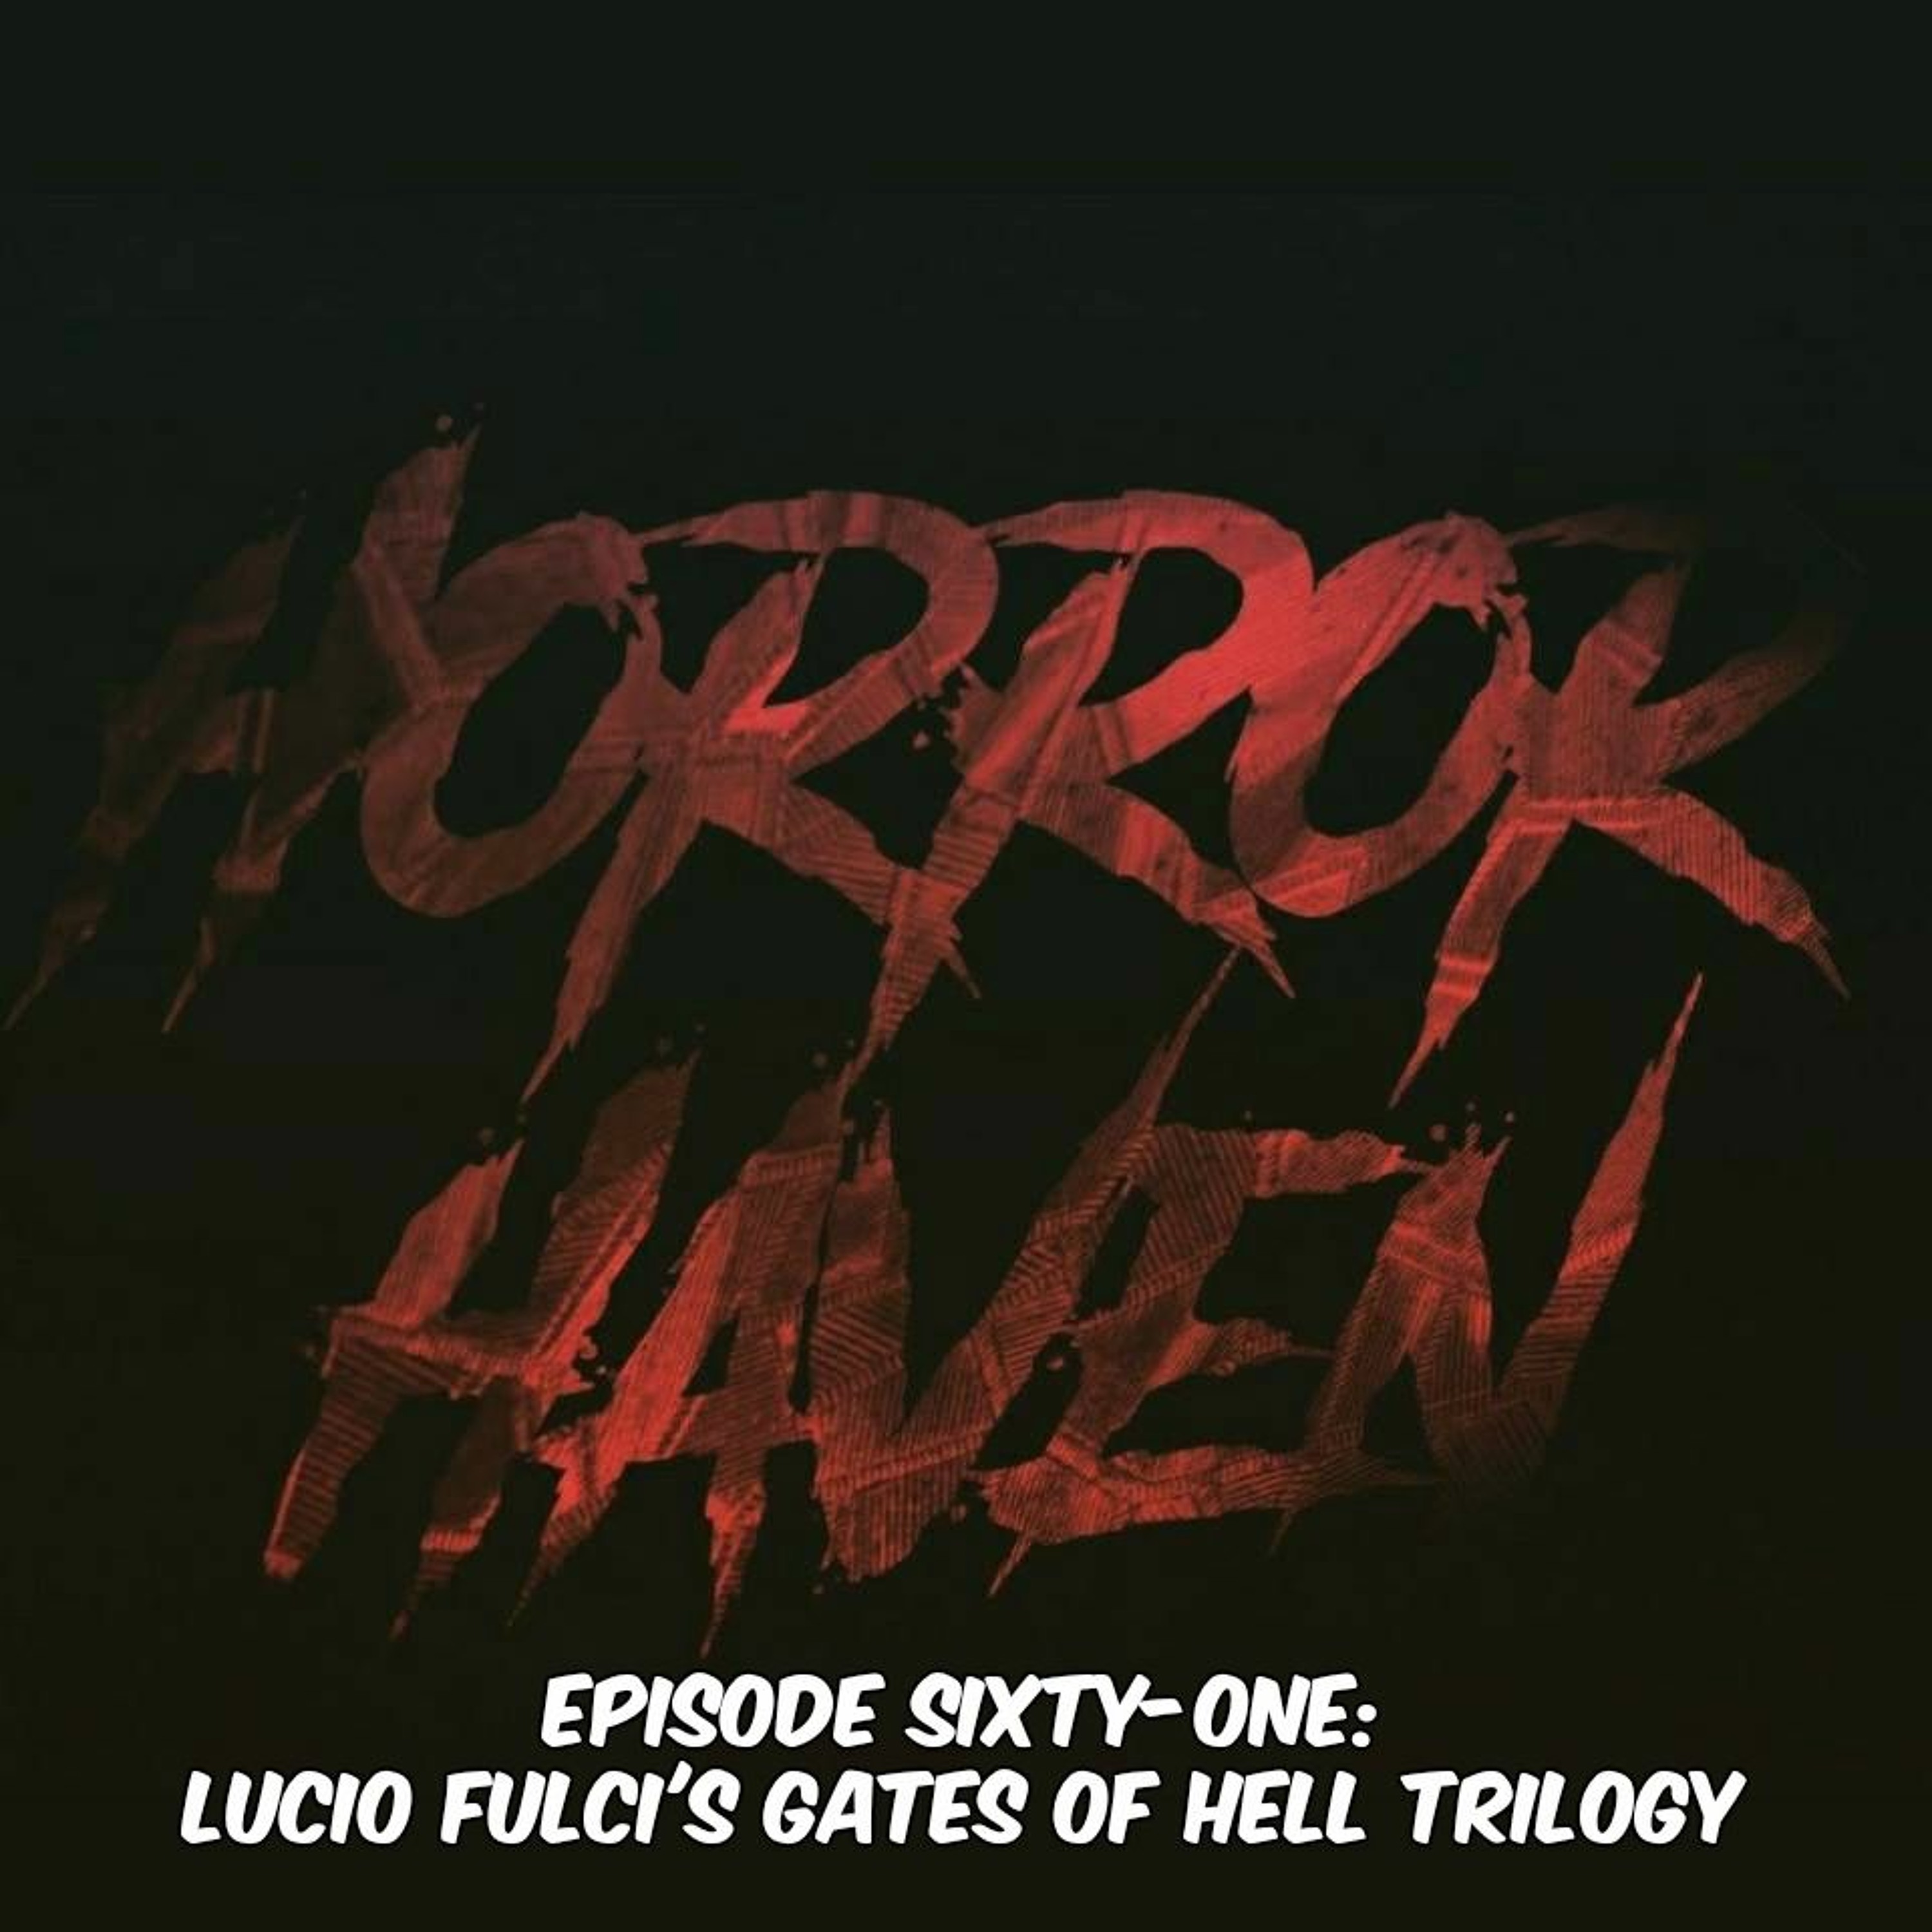 Episode Sixty-One:  Lucio Fulci's Gates of Hell Trilogy